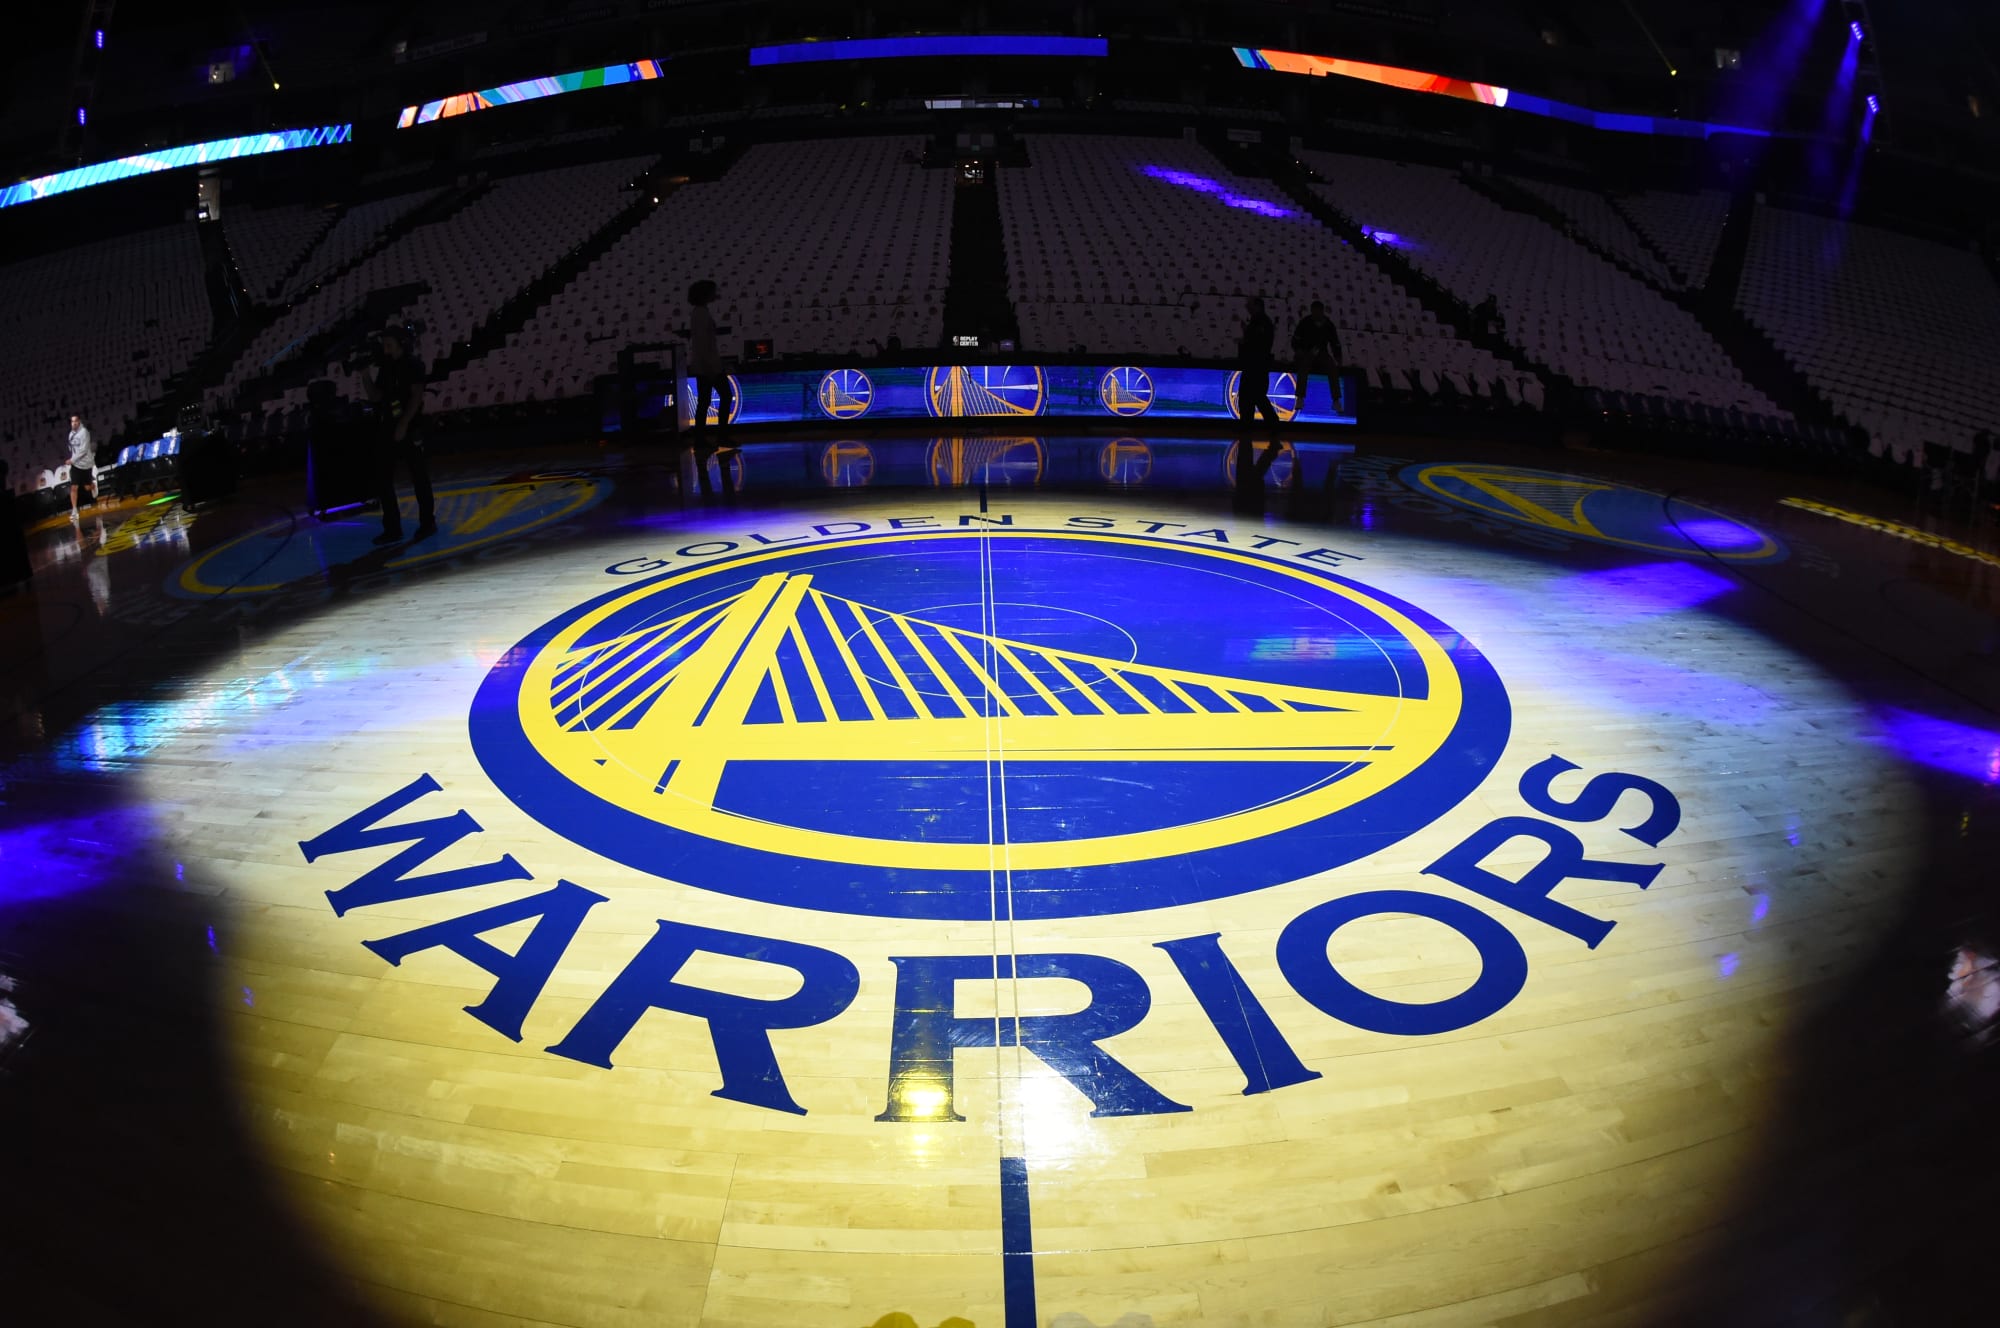 Golden State Warriors 5 opening night storylines every fan should follow